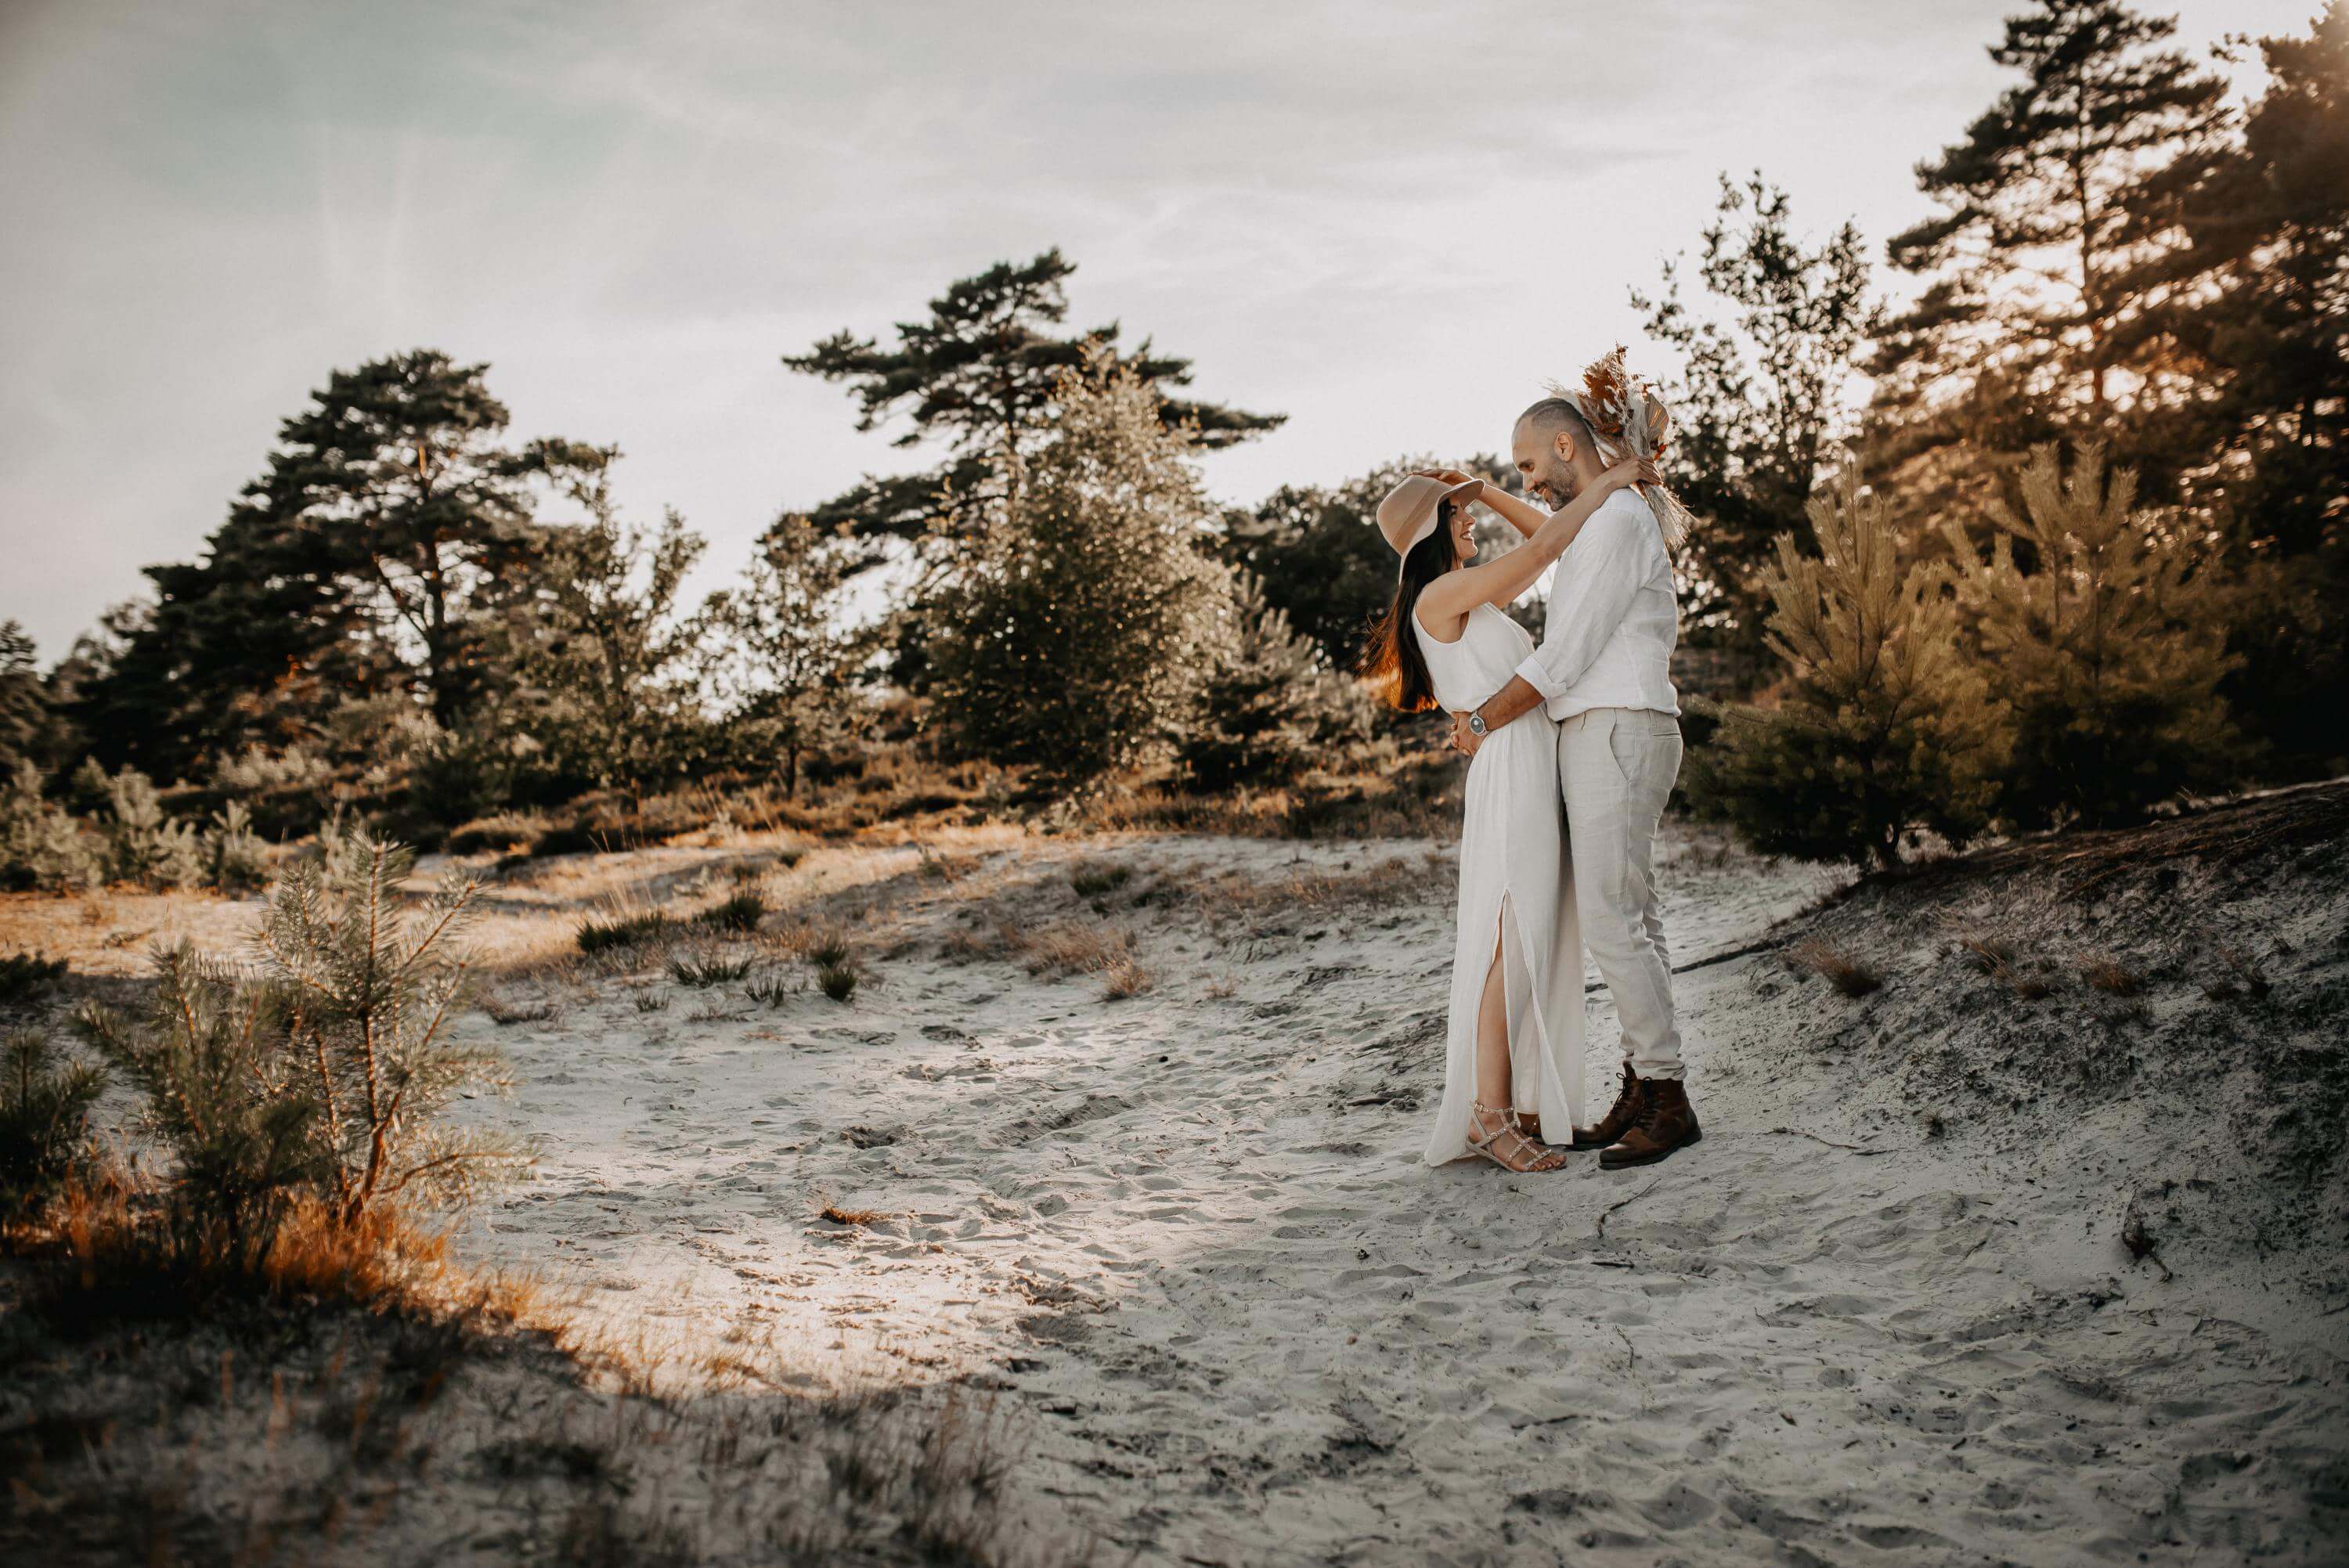 A pair of lovers, wearing light beige clothing, stand on a sandy dune in a heath landscape in the flat sun. They both hug and look into each other's eyes.